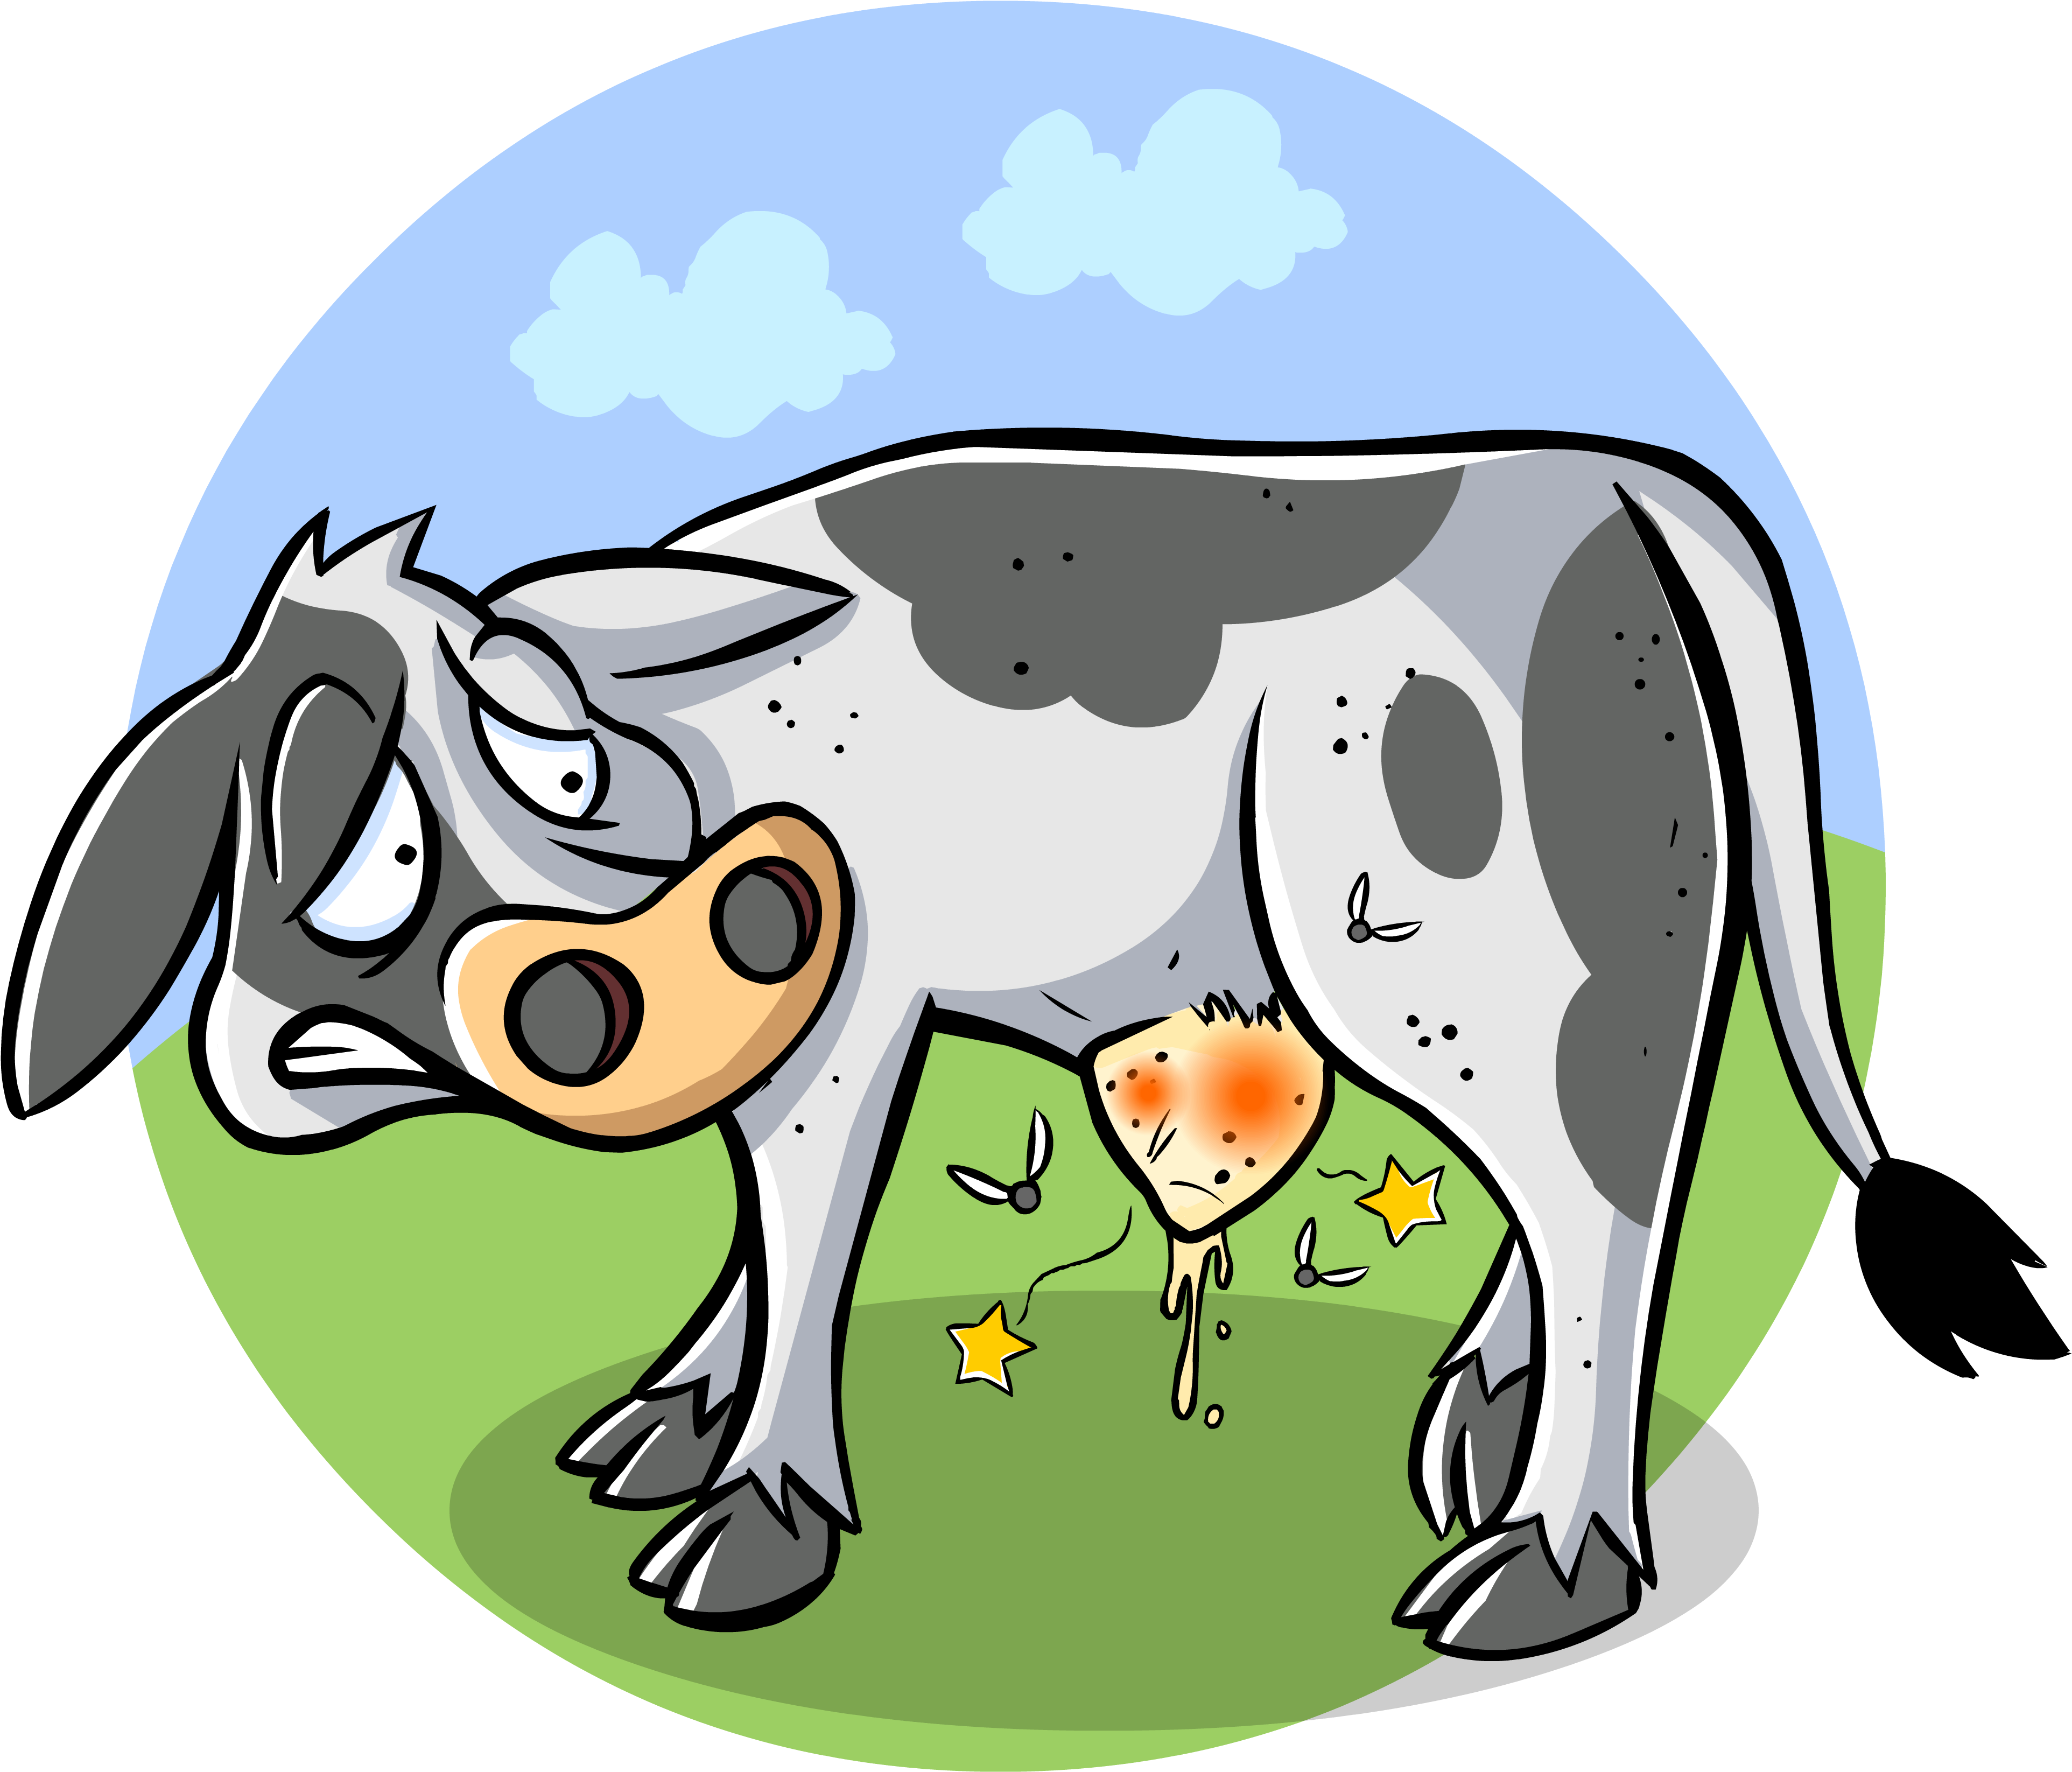 Drawing Of An Ill Cow - World Veterinary Day 2018 Theme (4000x4000)